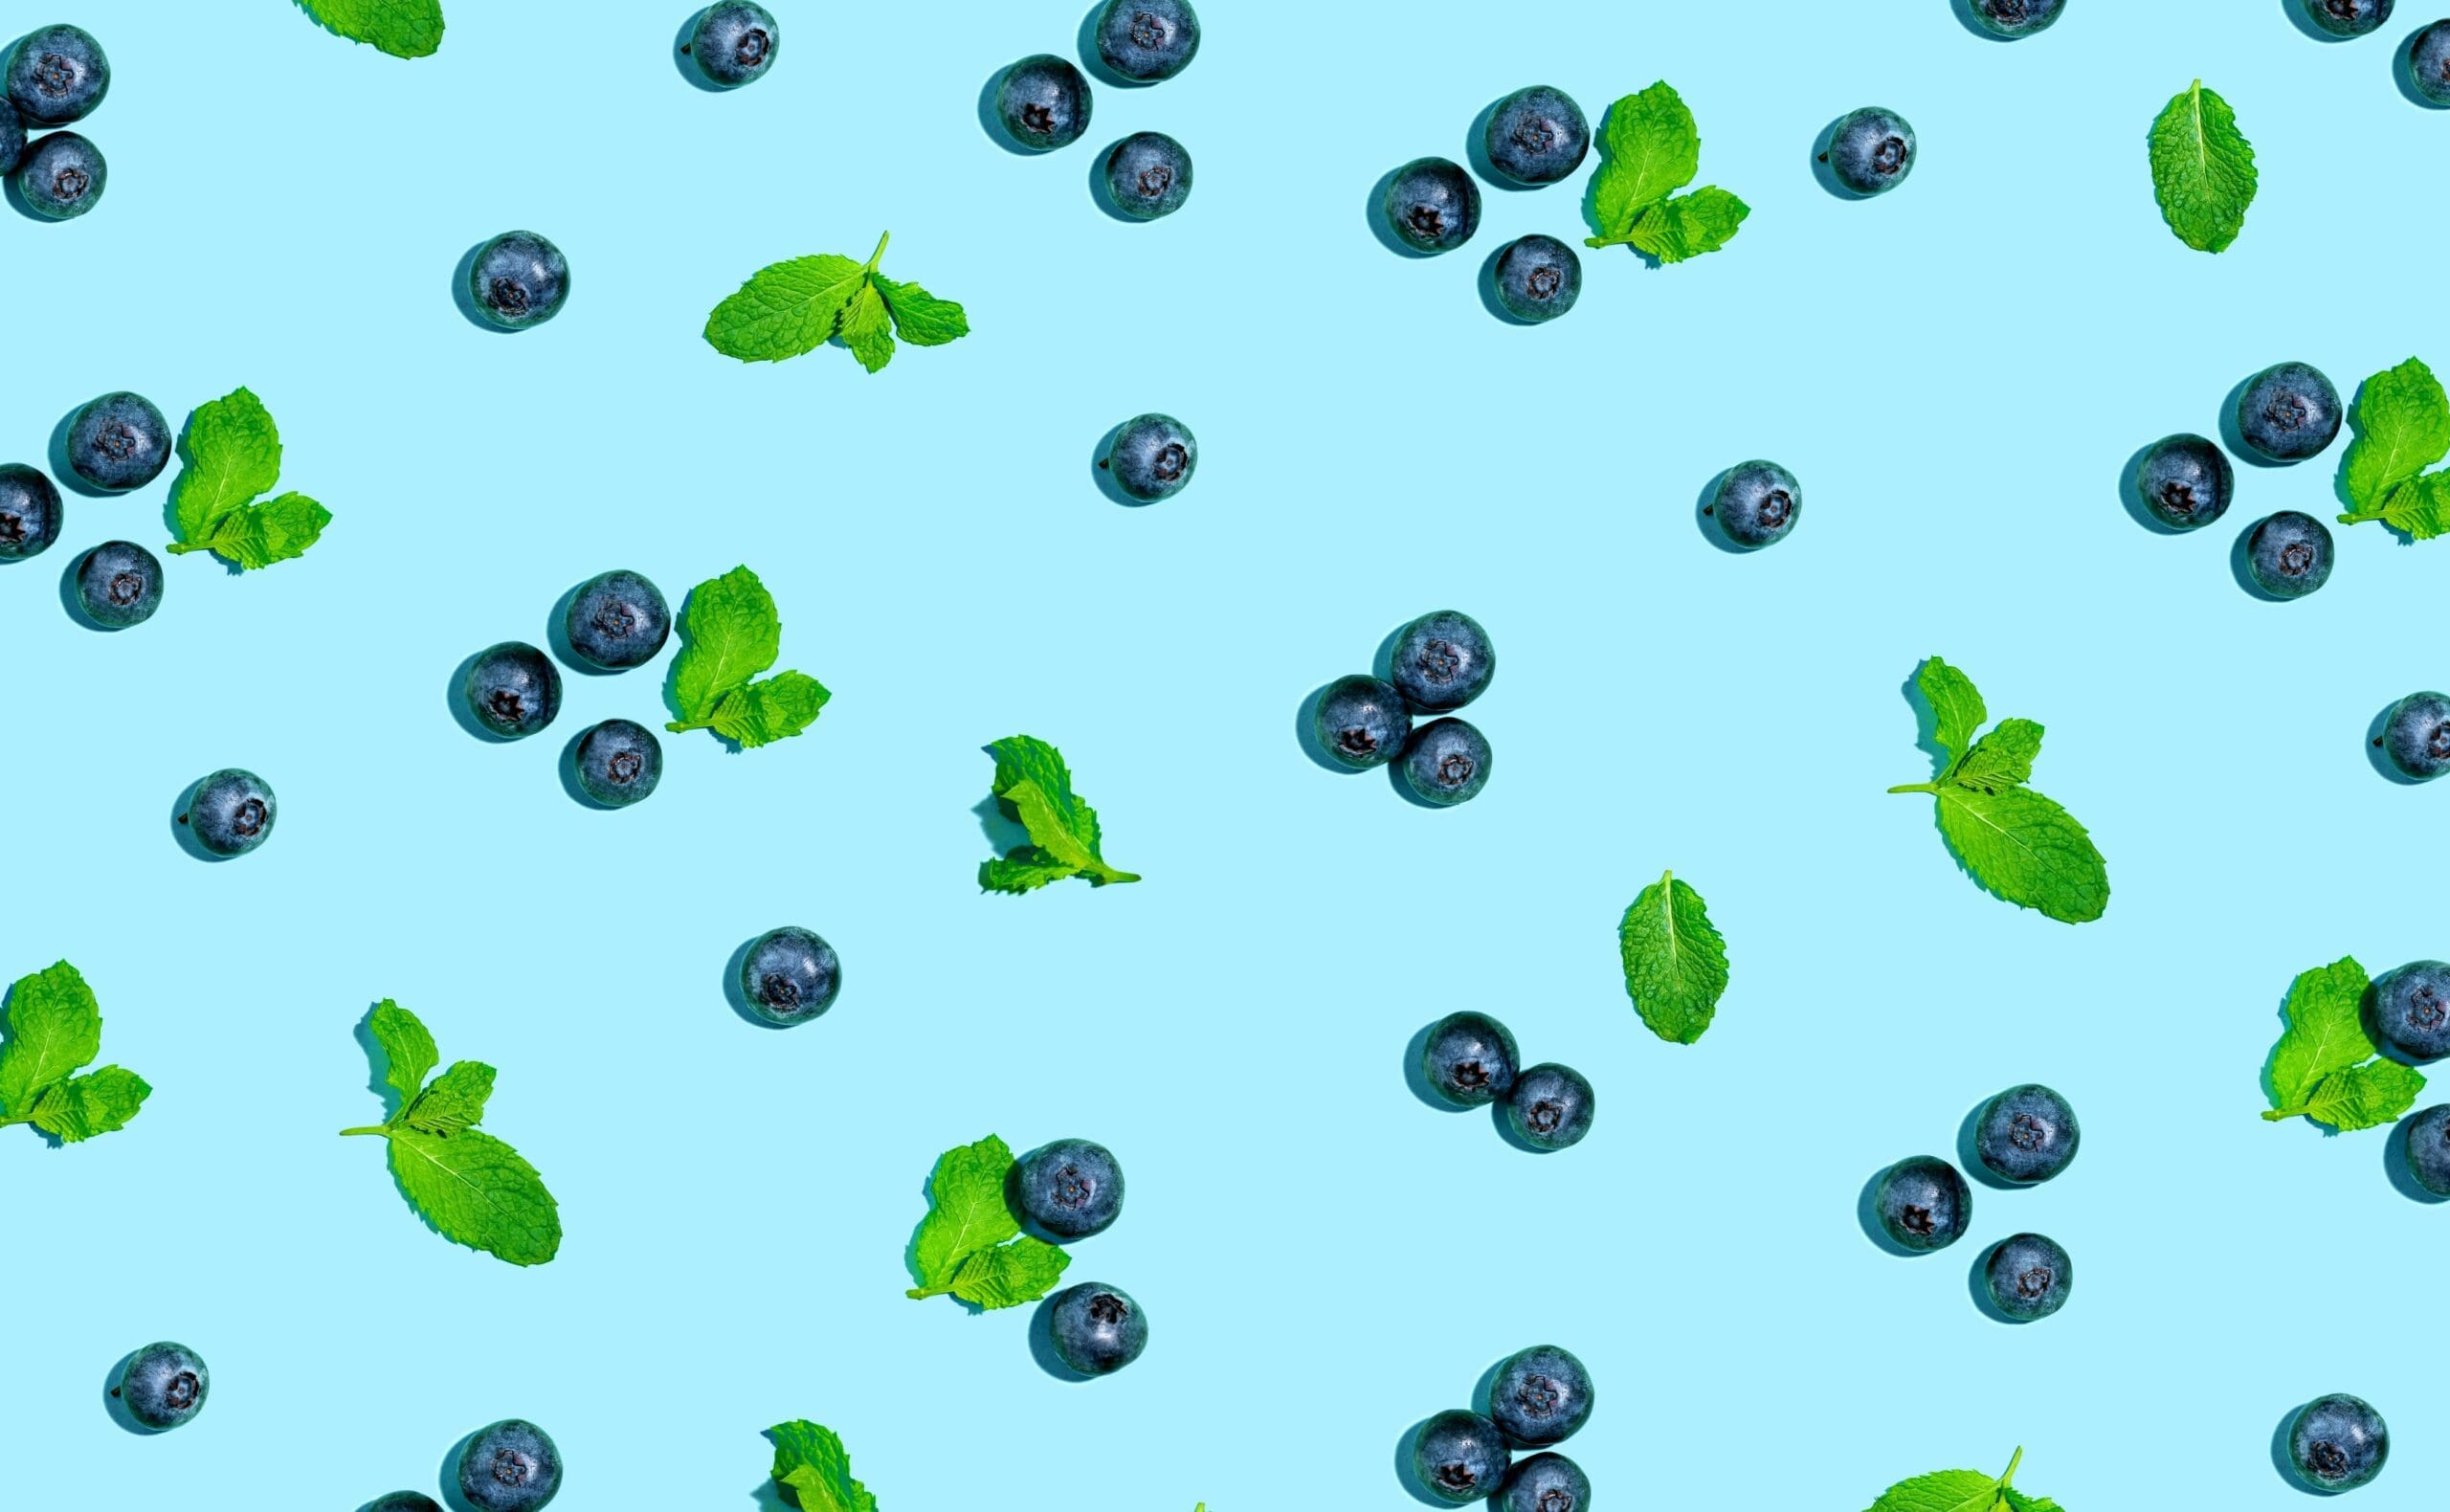 Can blueberries boost the brain?